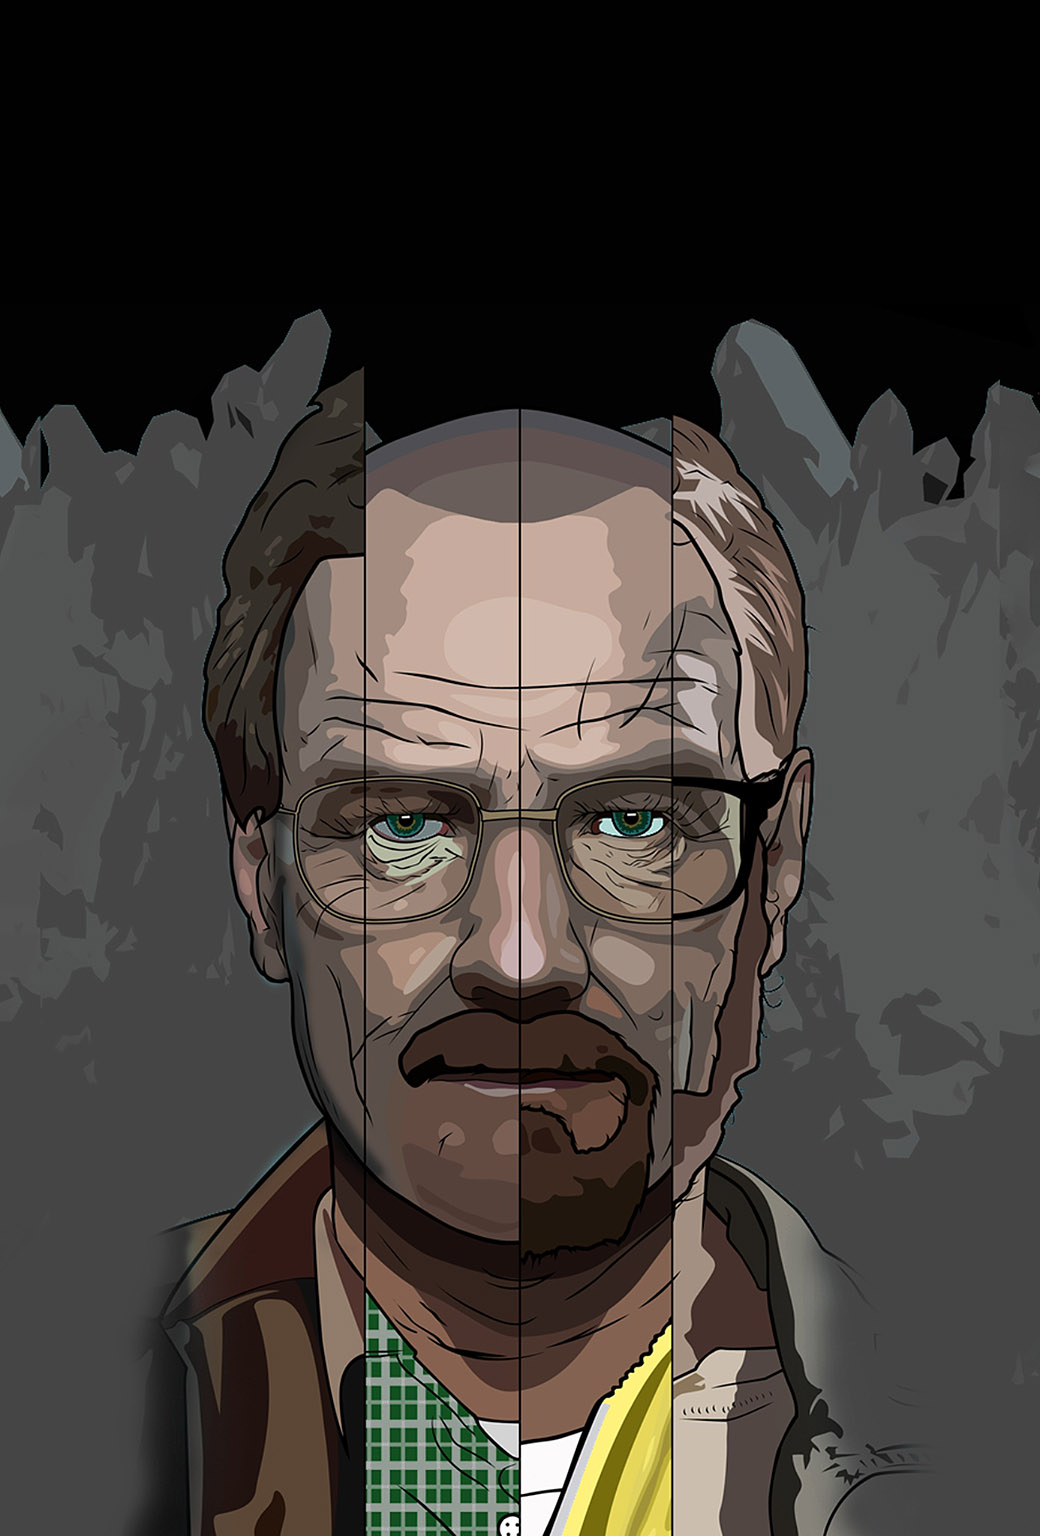 Breaking Bad wallpaper for iPhone and iPad